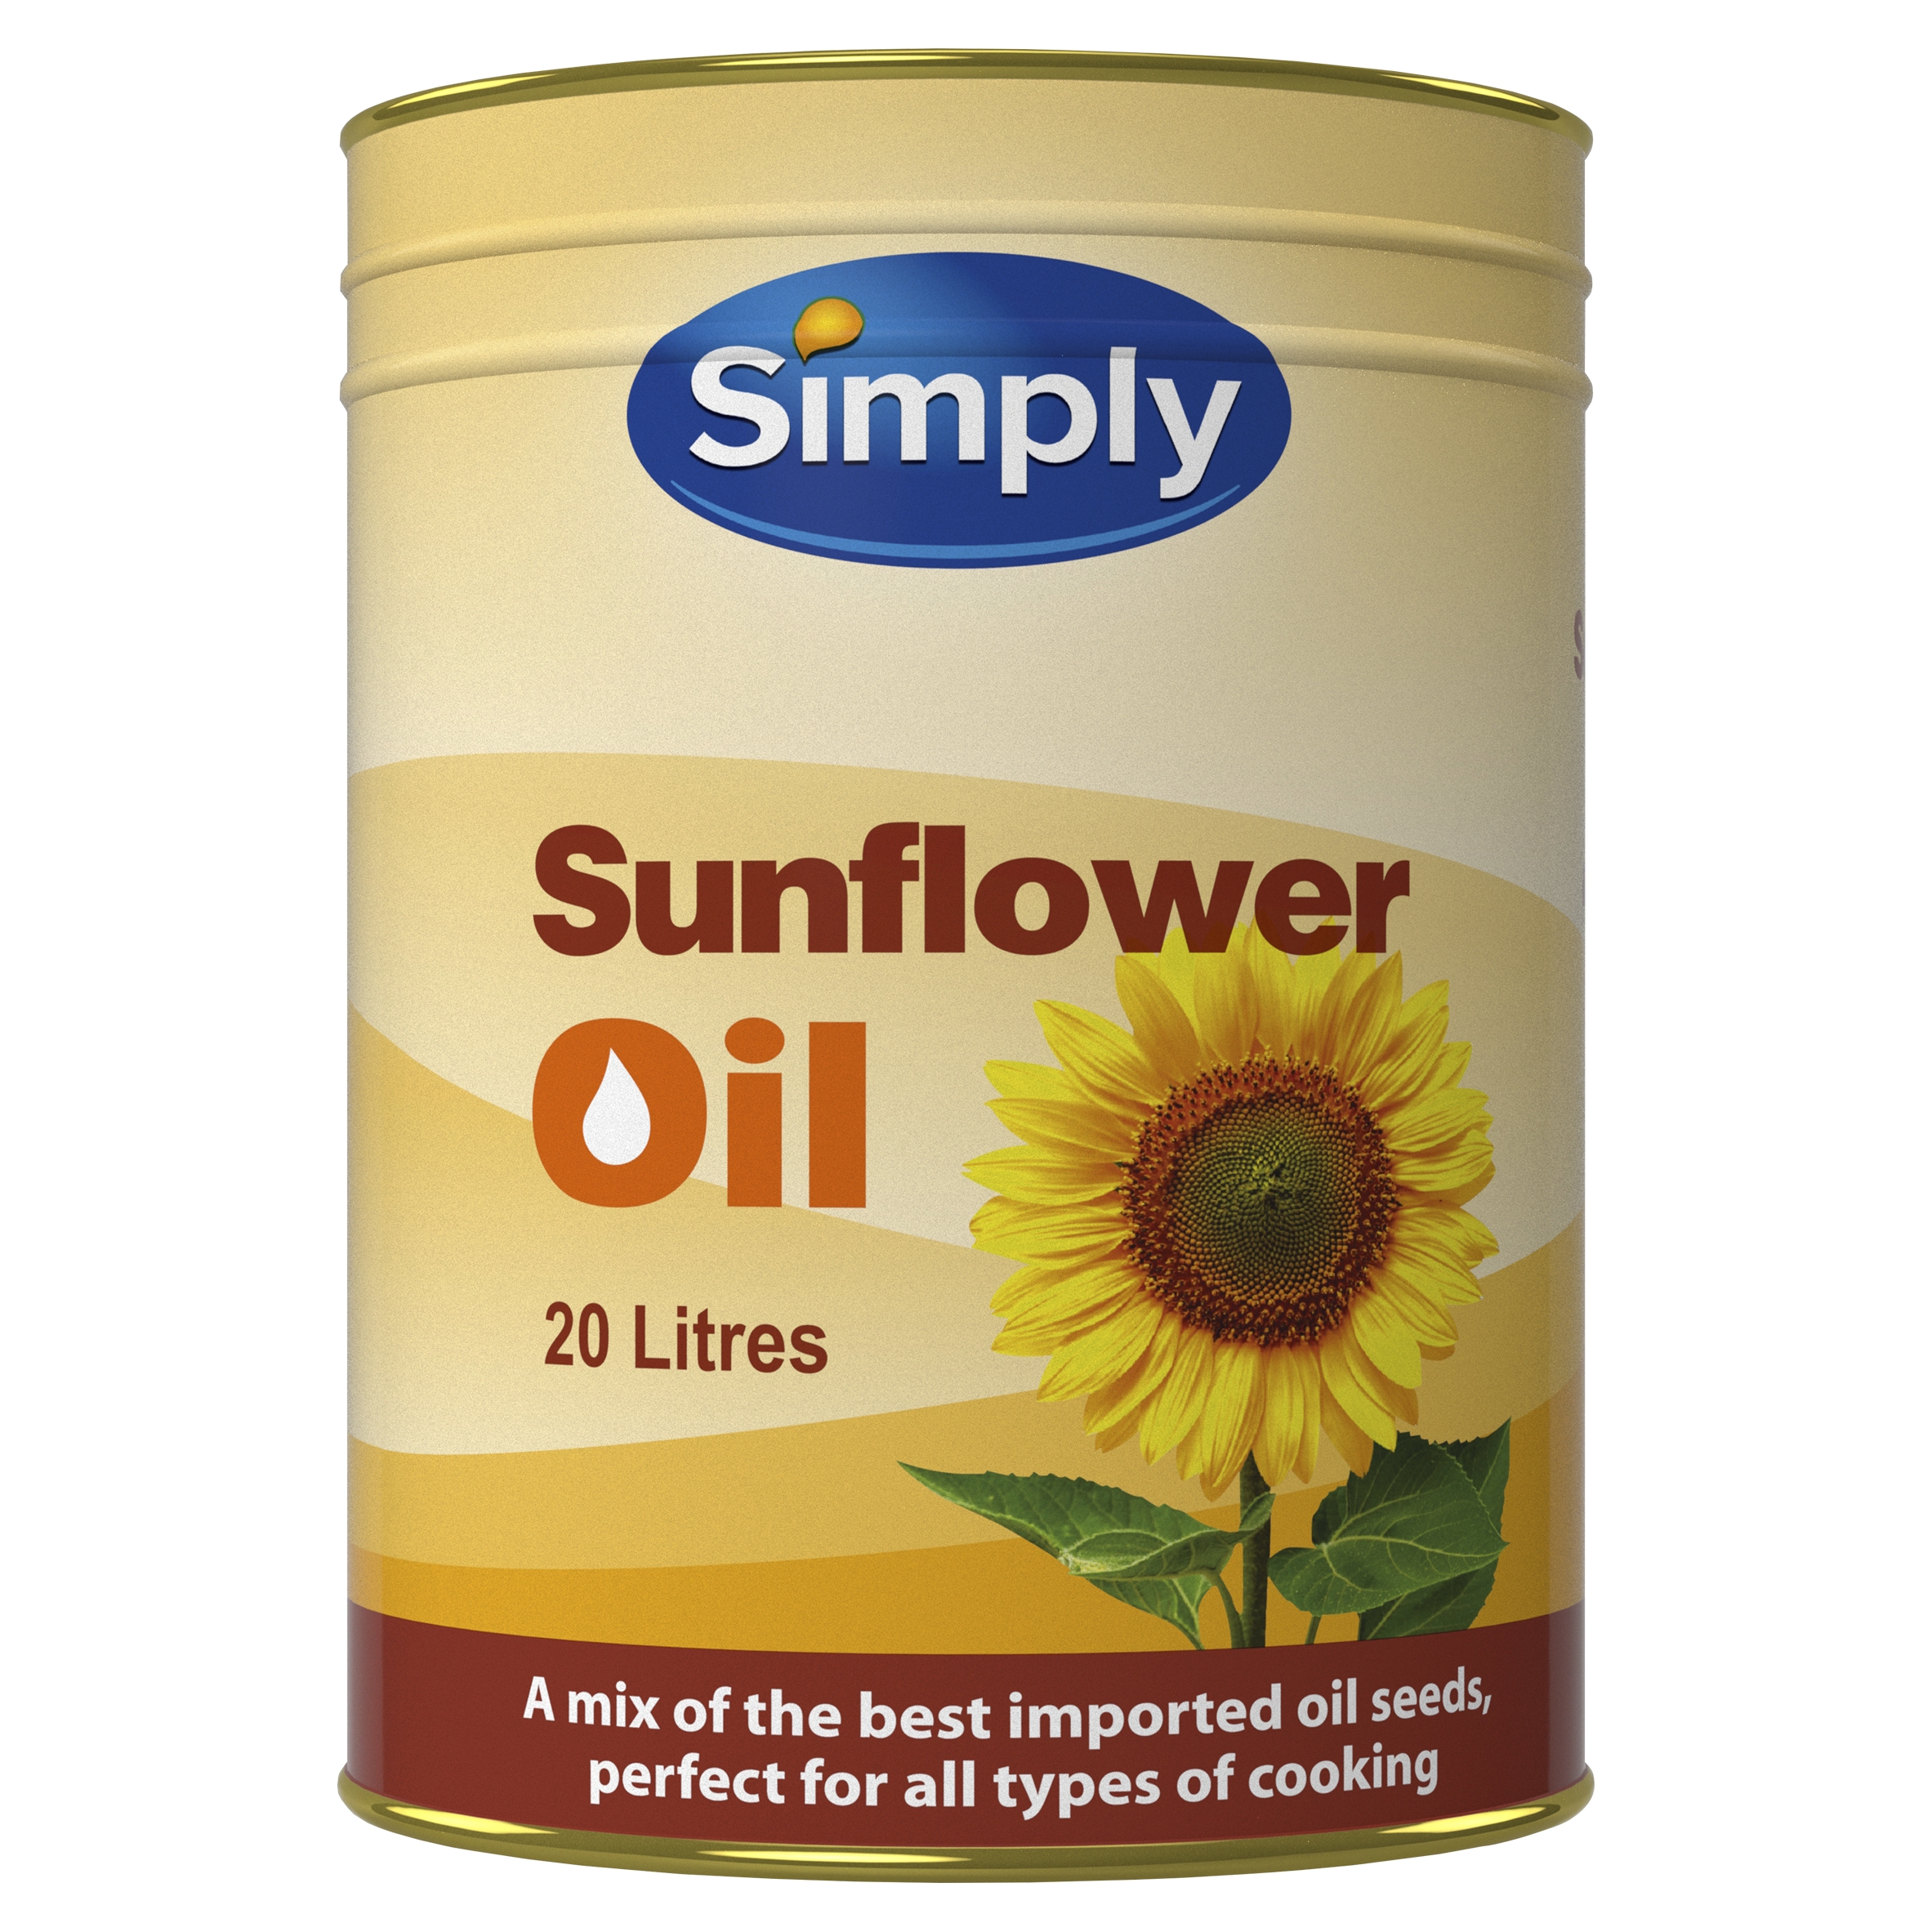 Simply Sunflower Oil 20 Litres product photo